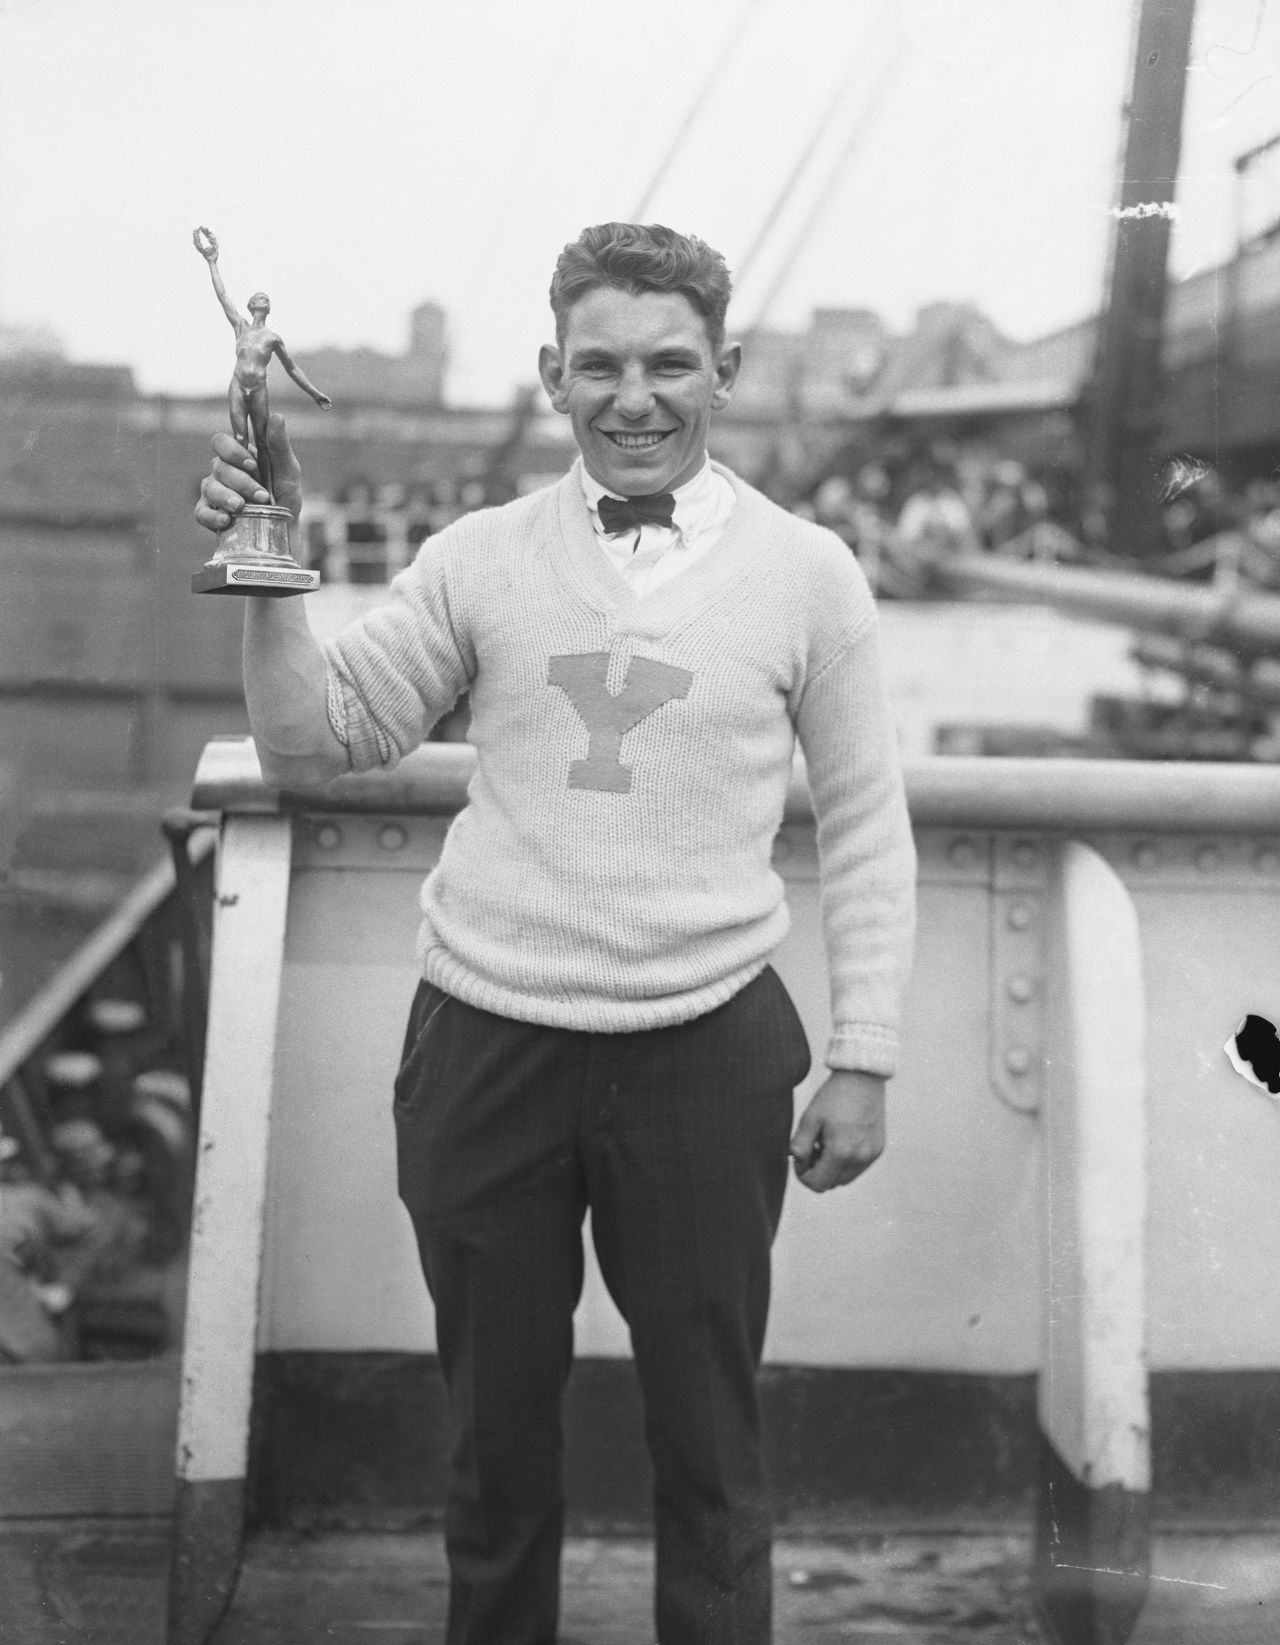 American Eddie Eagan holds his trophy after winning an Olympic gold medal in boxing in 1920. Eagan is the only person in history to win Olympic gold medals in both a summer and winter sport.